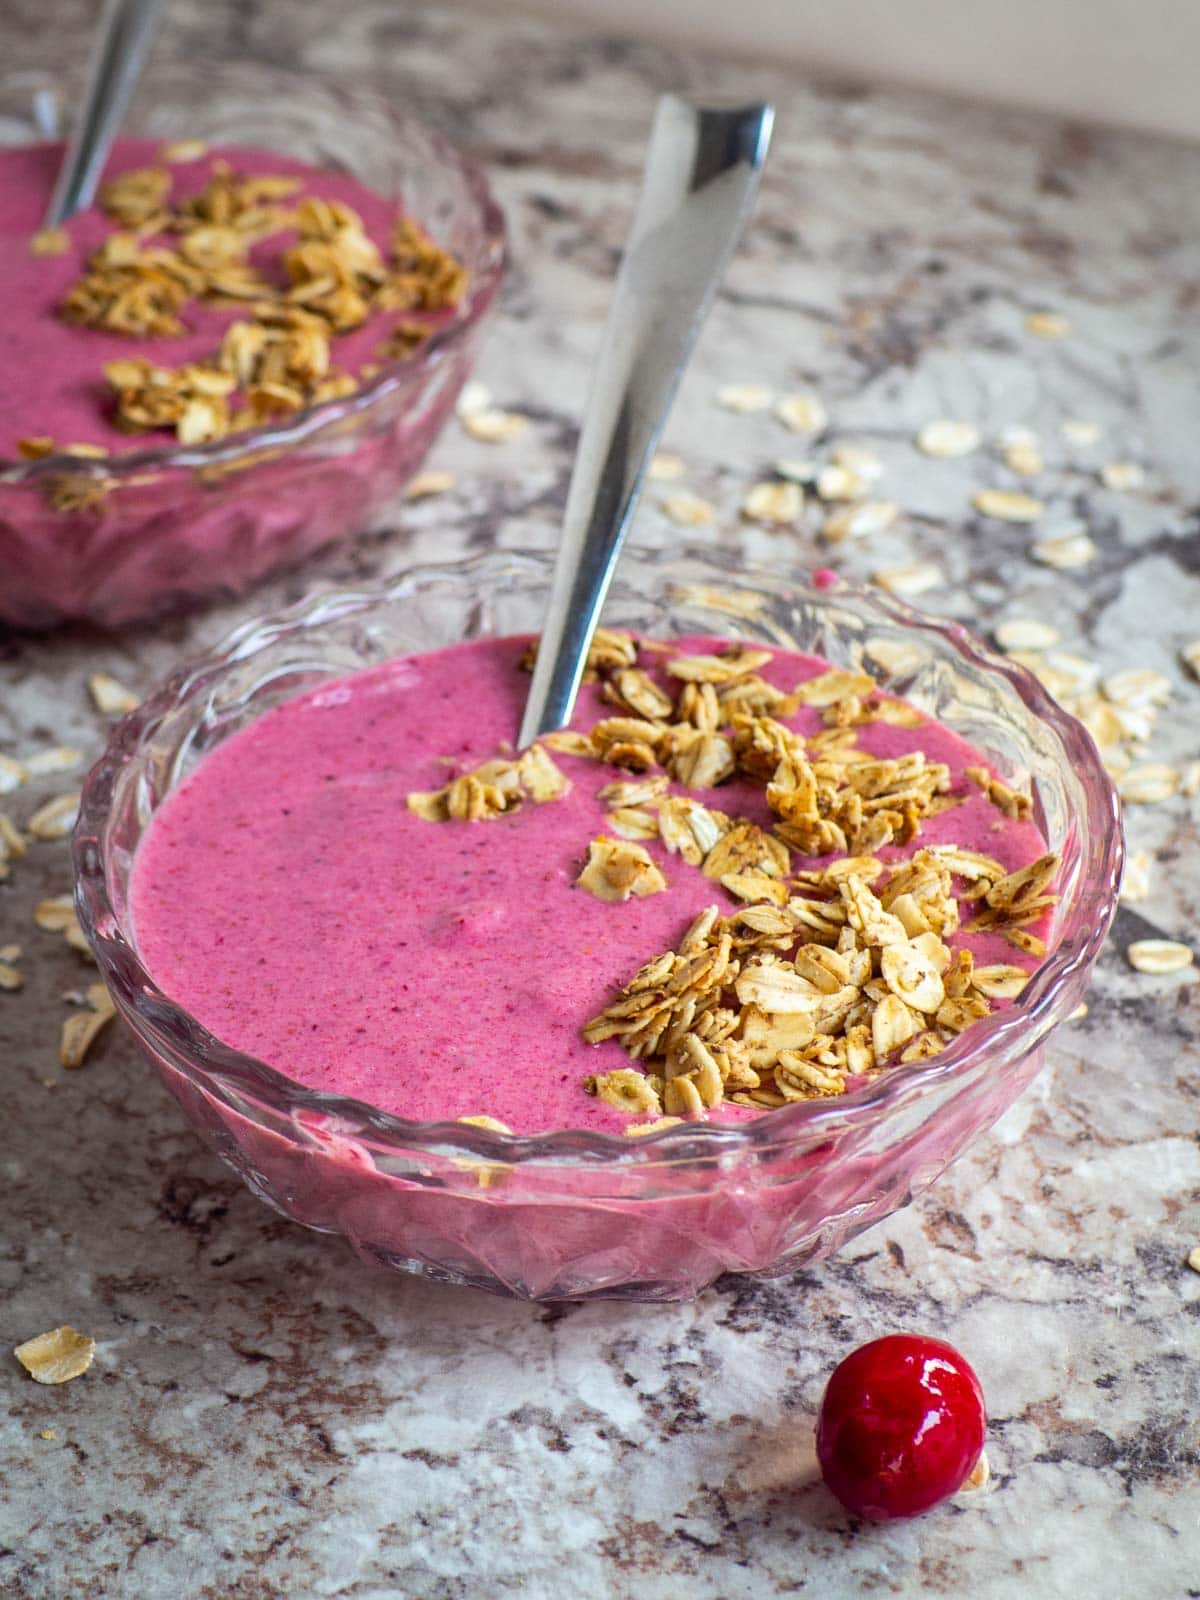 Picture of pink smoothie bowl topped with granola.